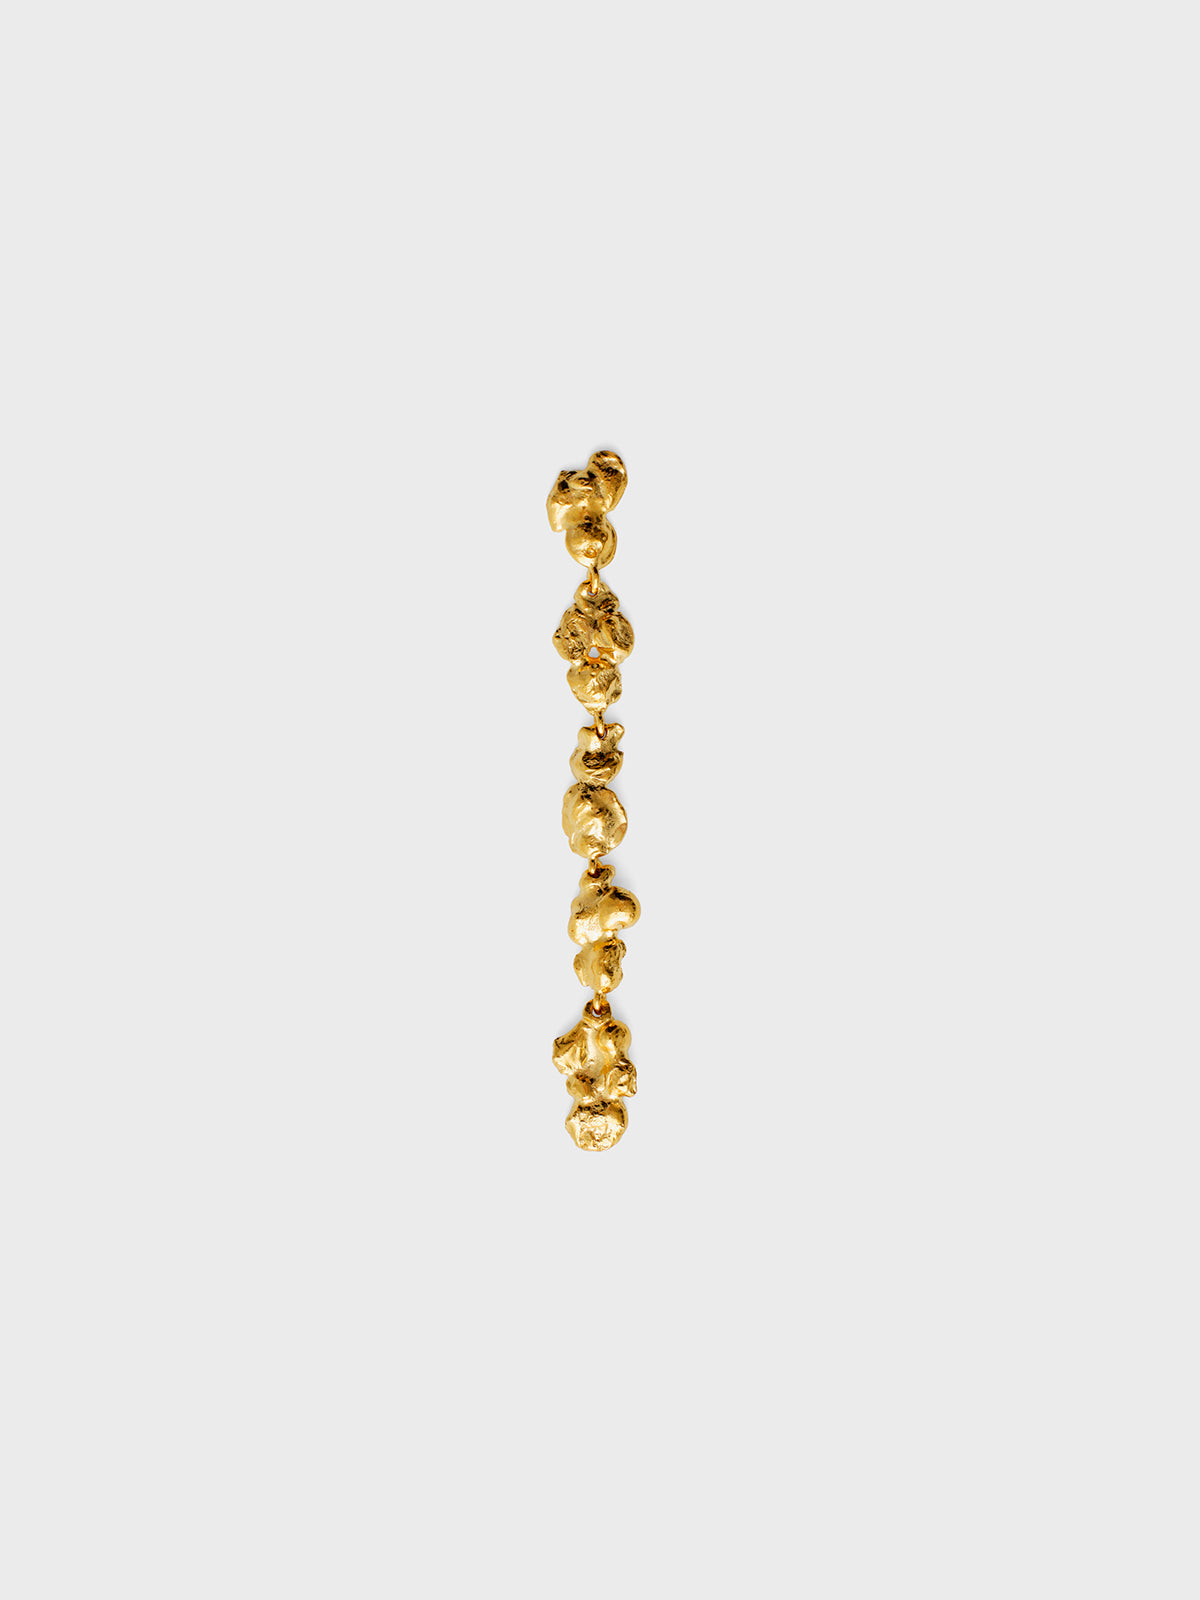 Lea Hoyer - Olivia Earring in Gold Plated